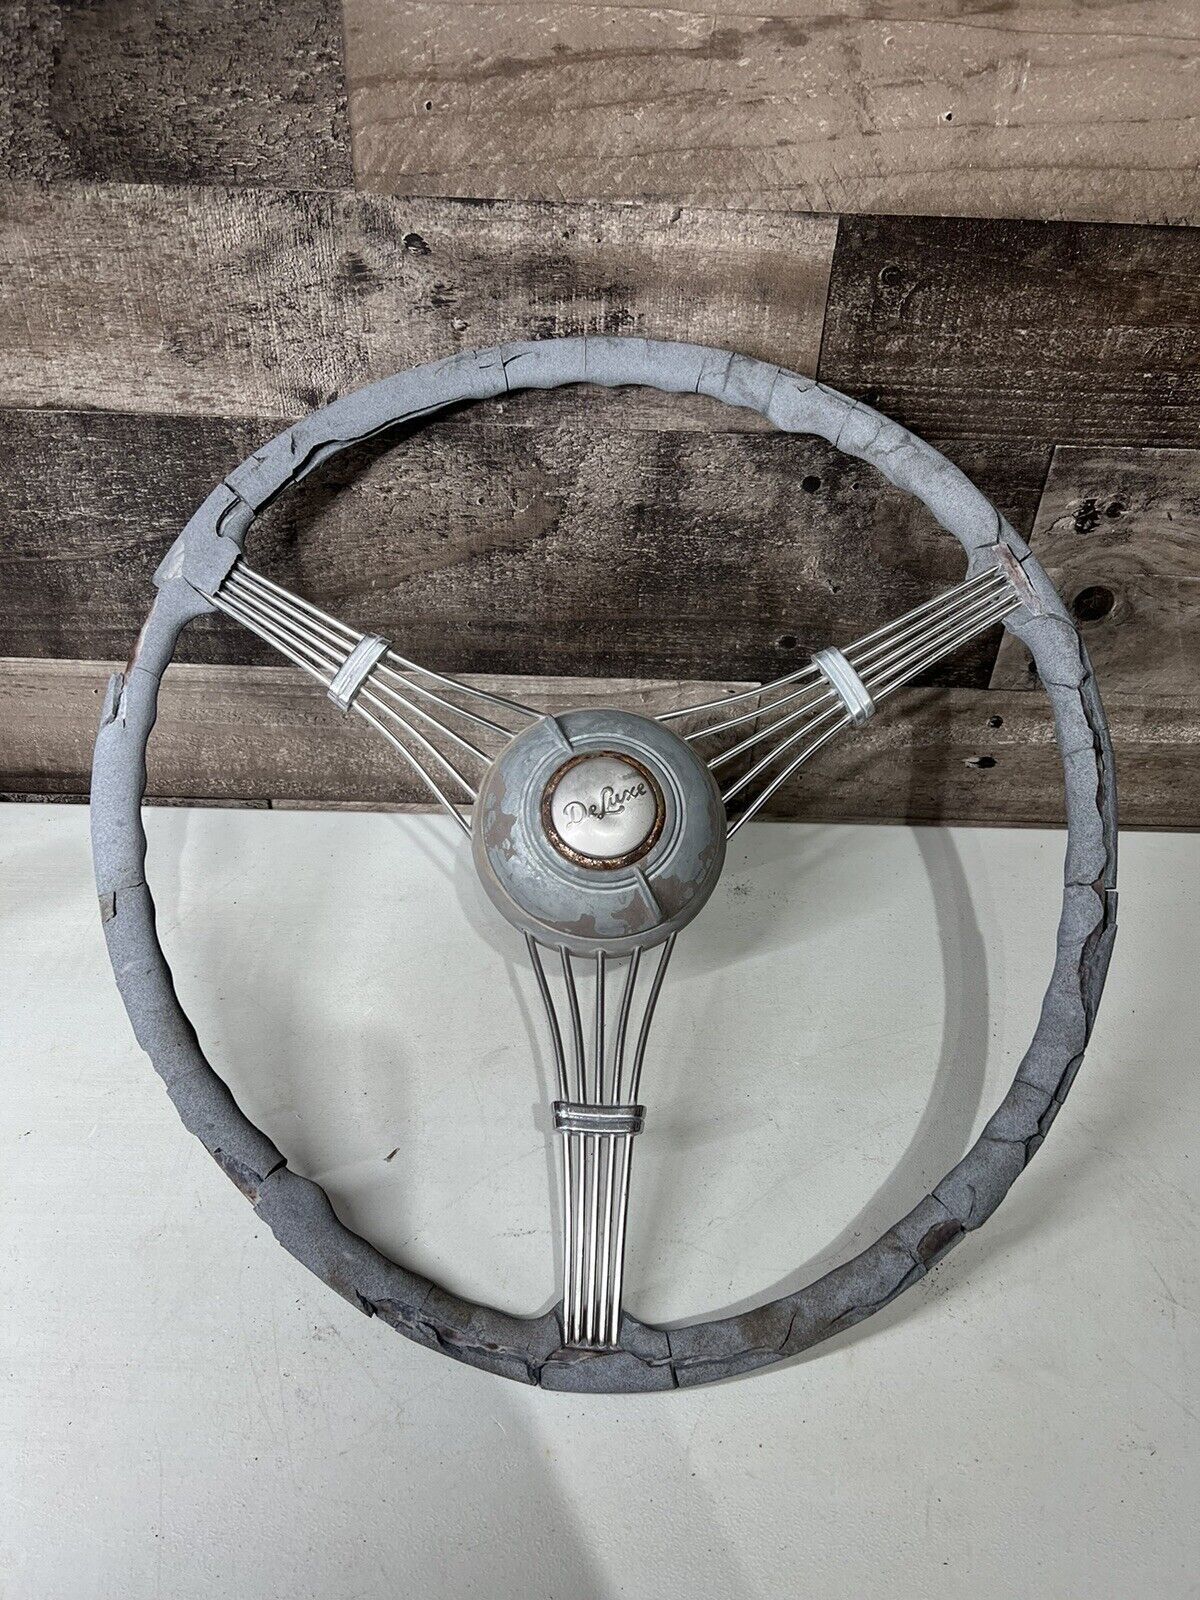 1930’s 1938 1939 Ford BANJO STEERING WHEEL Original Deluxe Accessory With Center